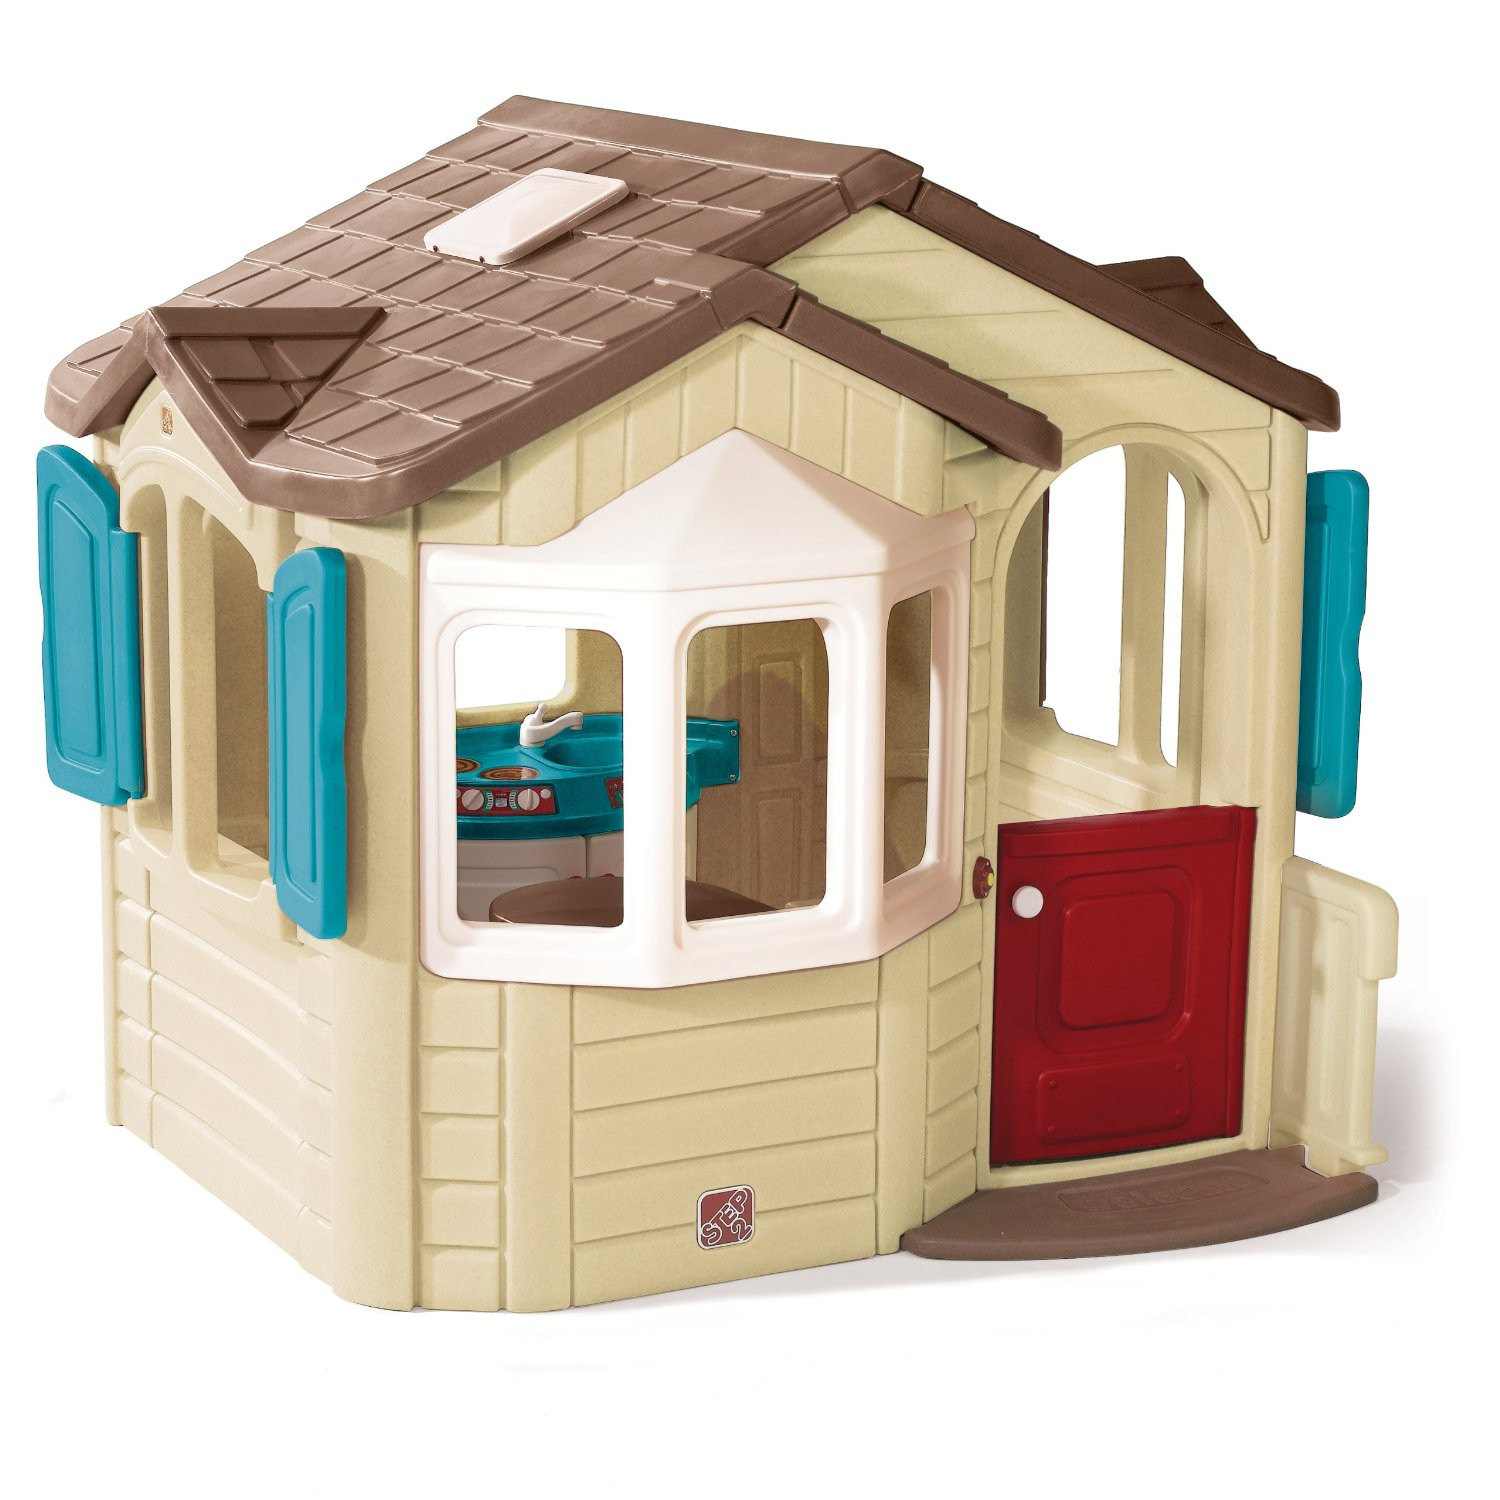 Kids Outdoor Plastic Playhouse
 Outdoor Playhouse with Kitchen Inside